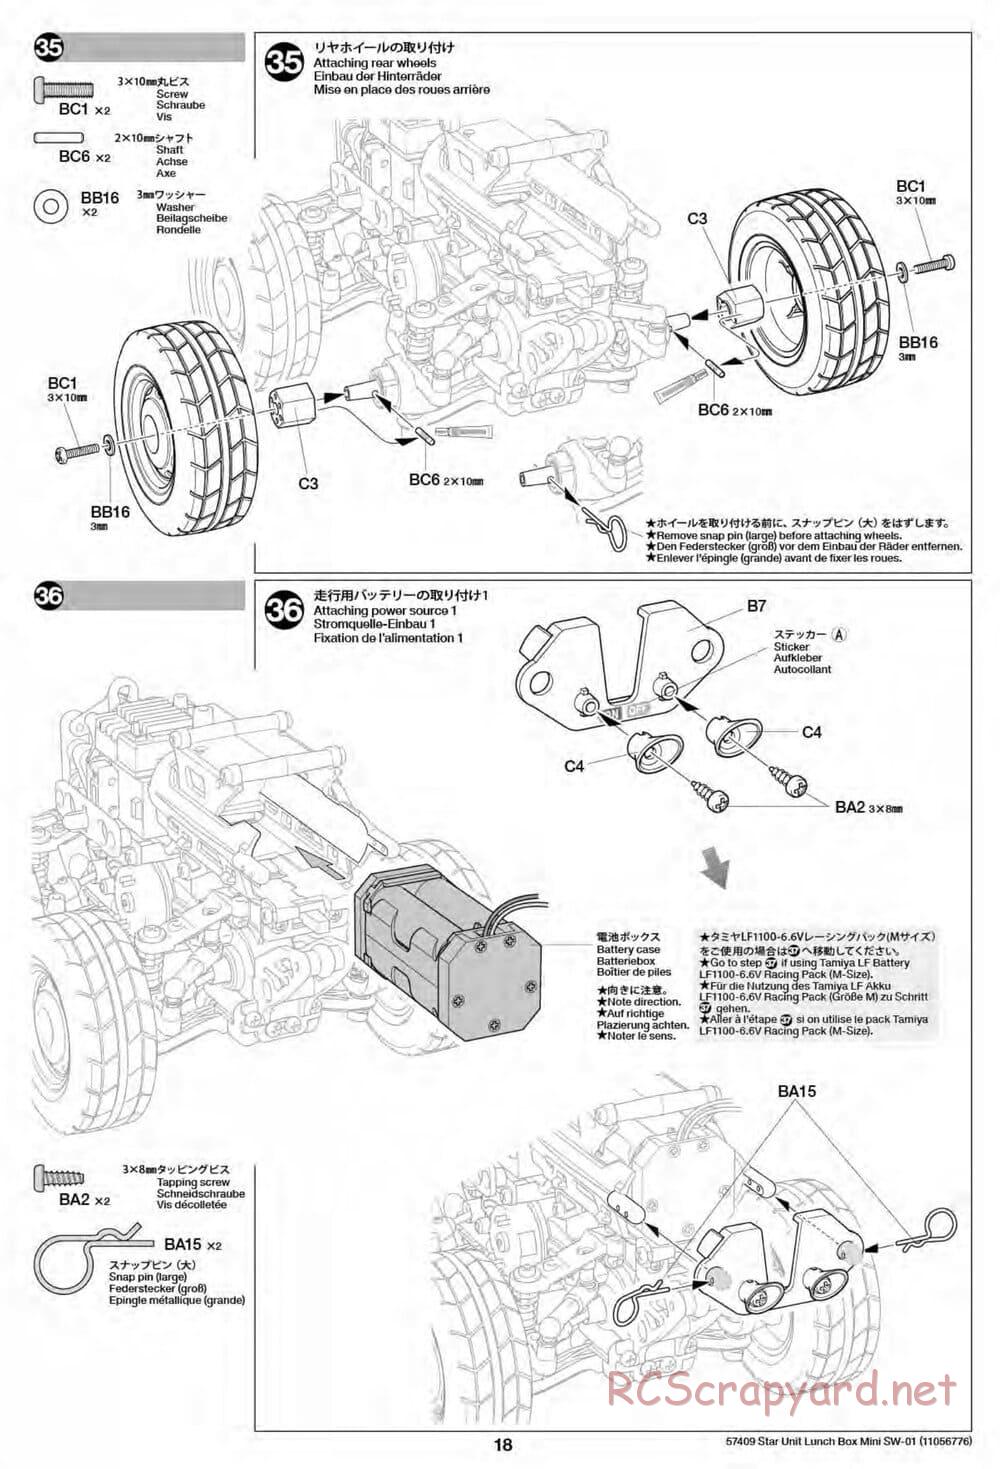 Tamiya - Lunch Box Mini - SW-01 Chassis - Manual - Page 18